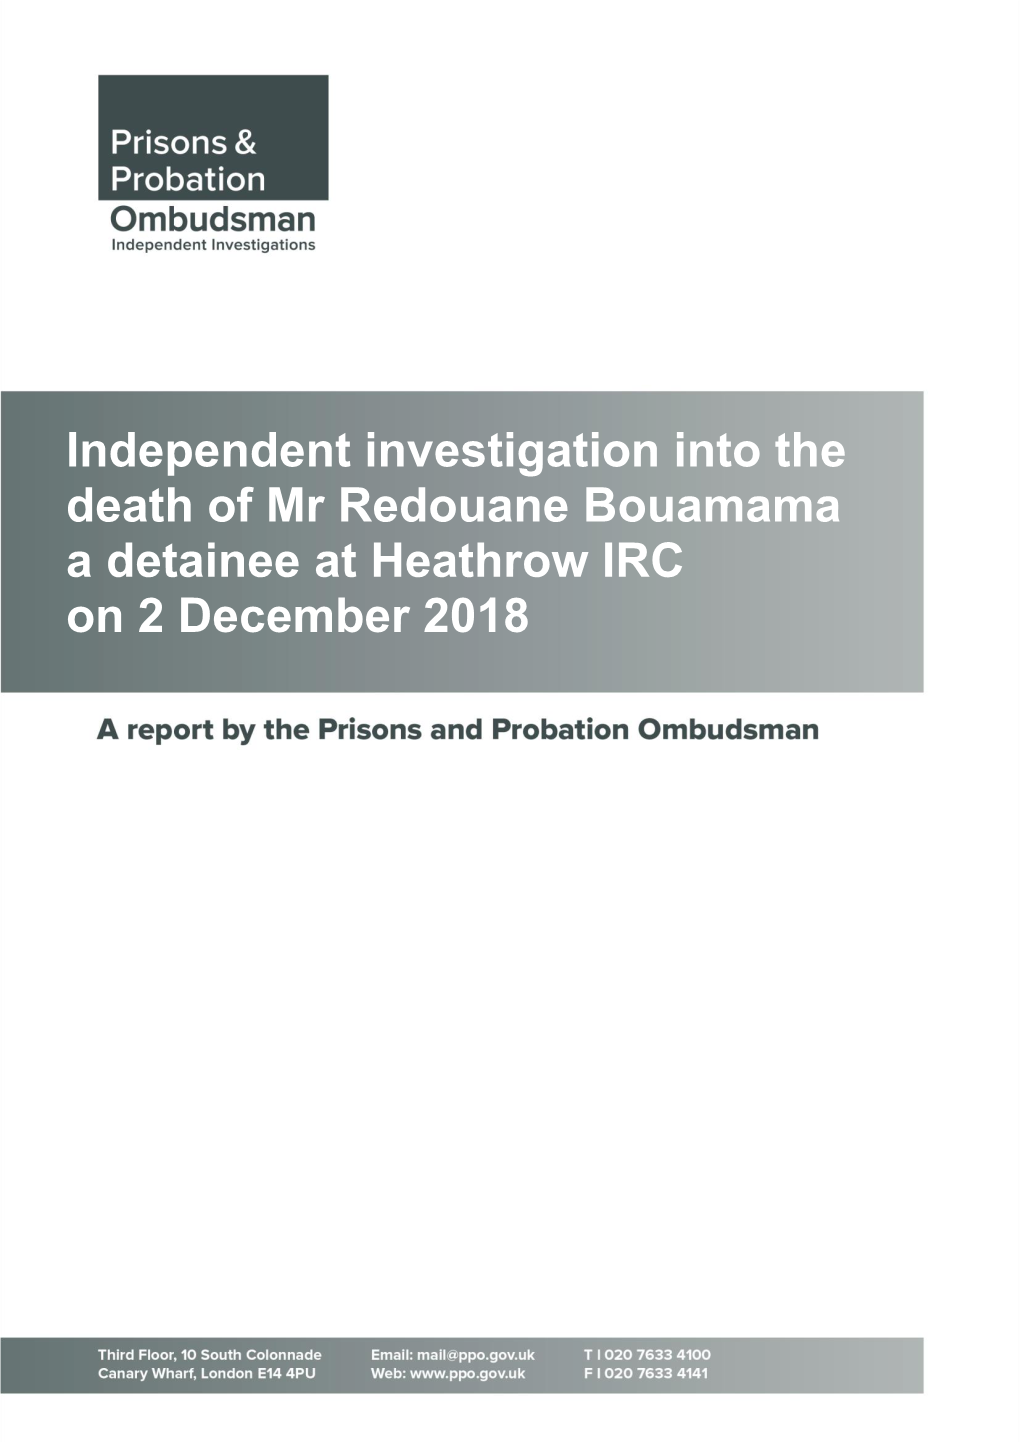 Independent Investigation Into the Death of Mr Redouane Bouamama a Detainee at Heathrow IRC on 2 December 2018